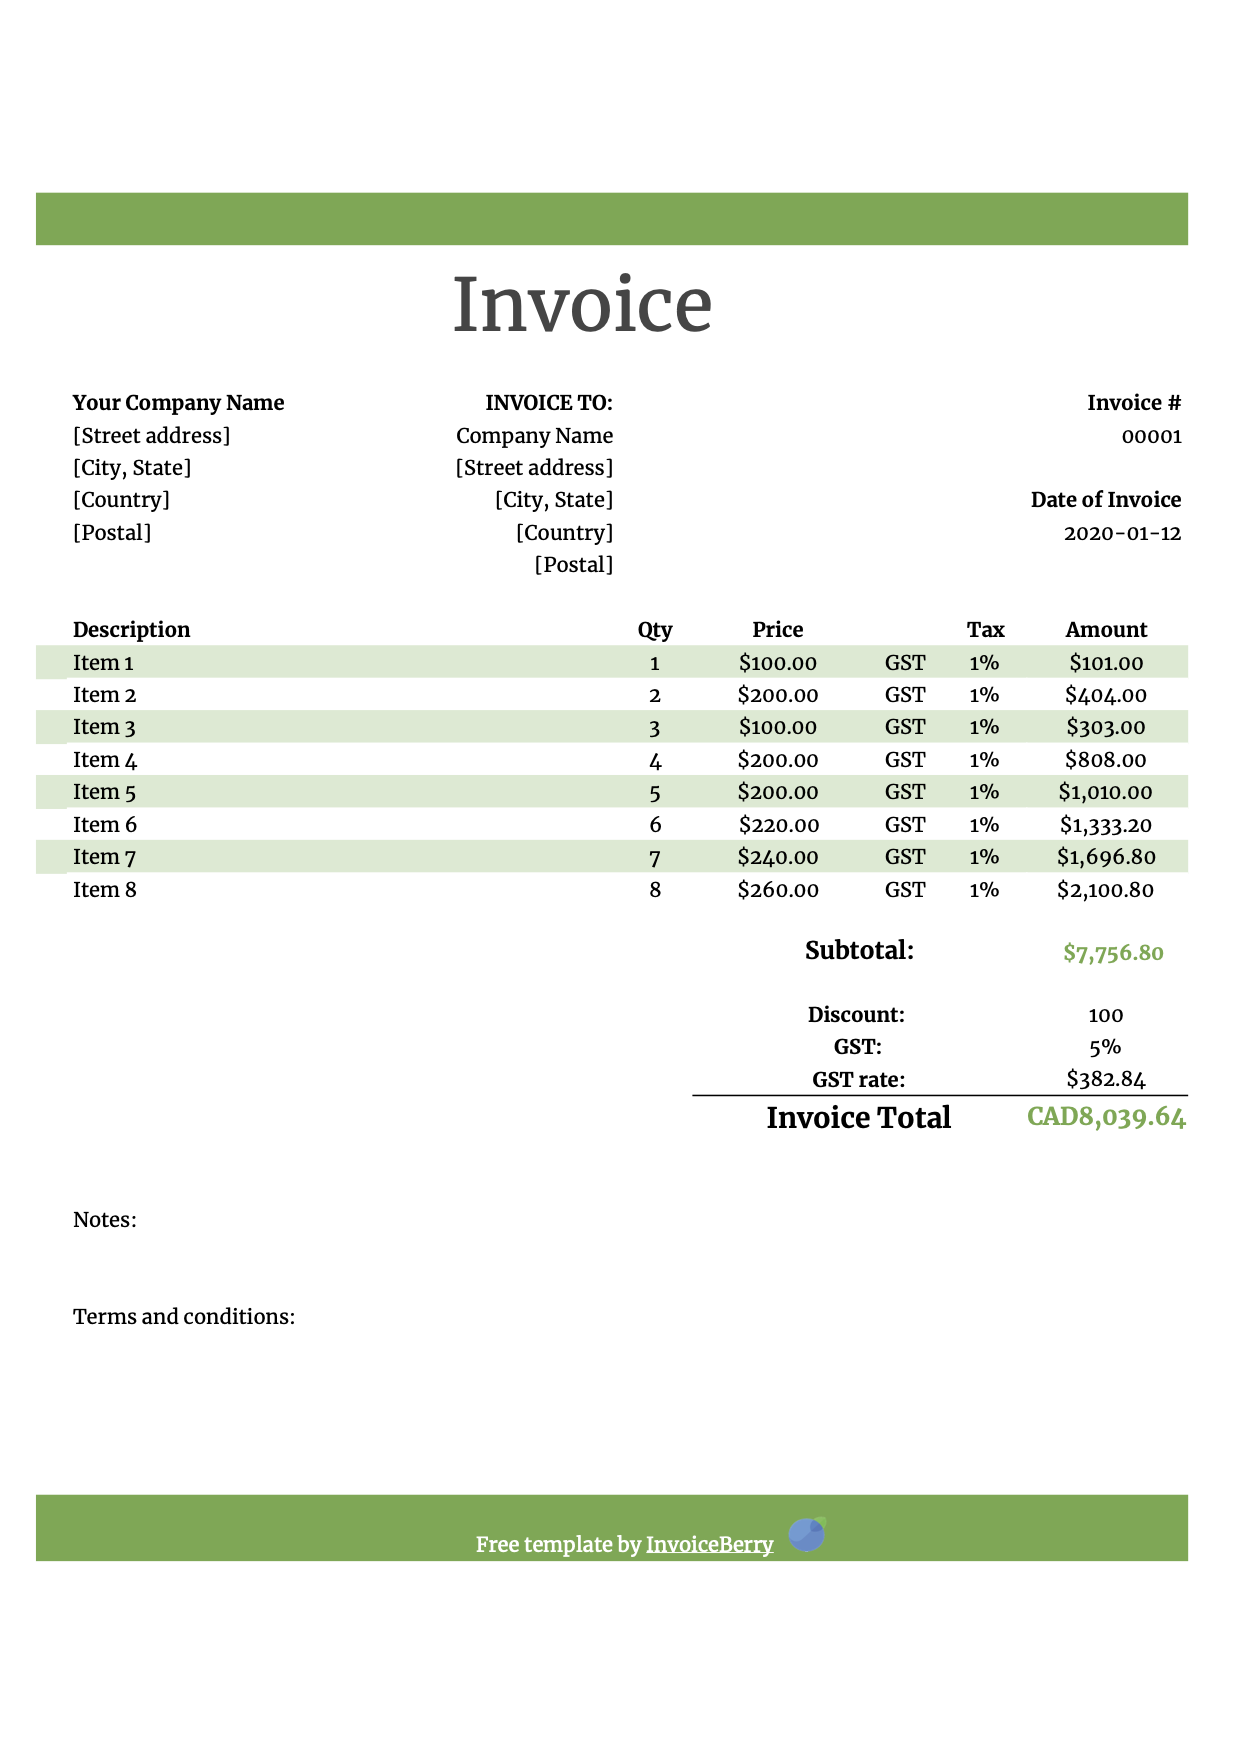 Free Numbers invoice templates - get invoice templates for Mac Intended For Sample Tax Invoice Template Australia